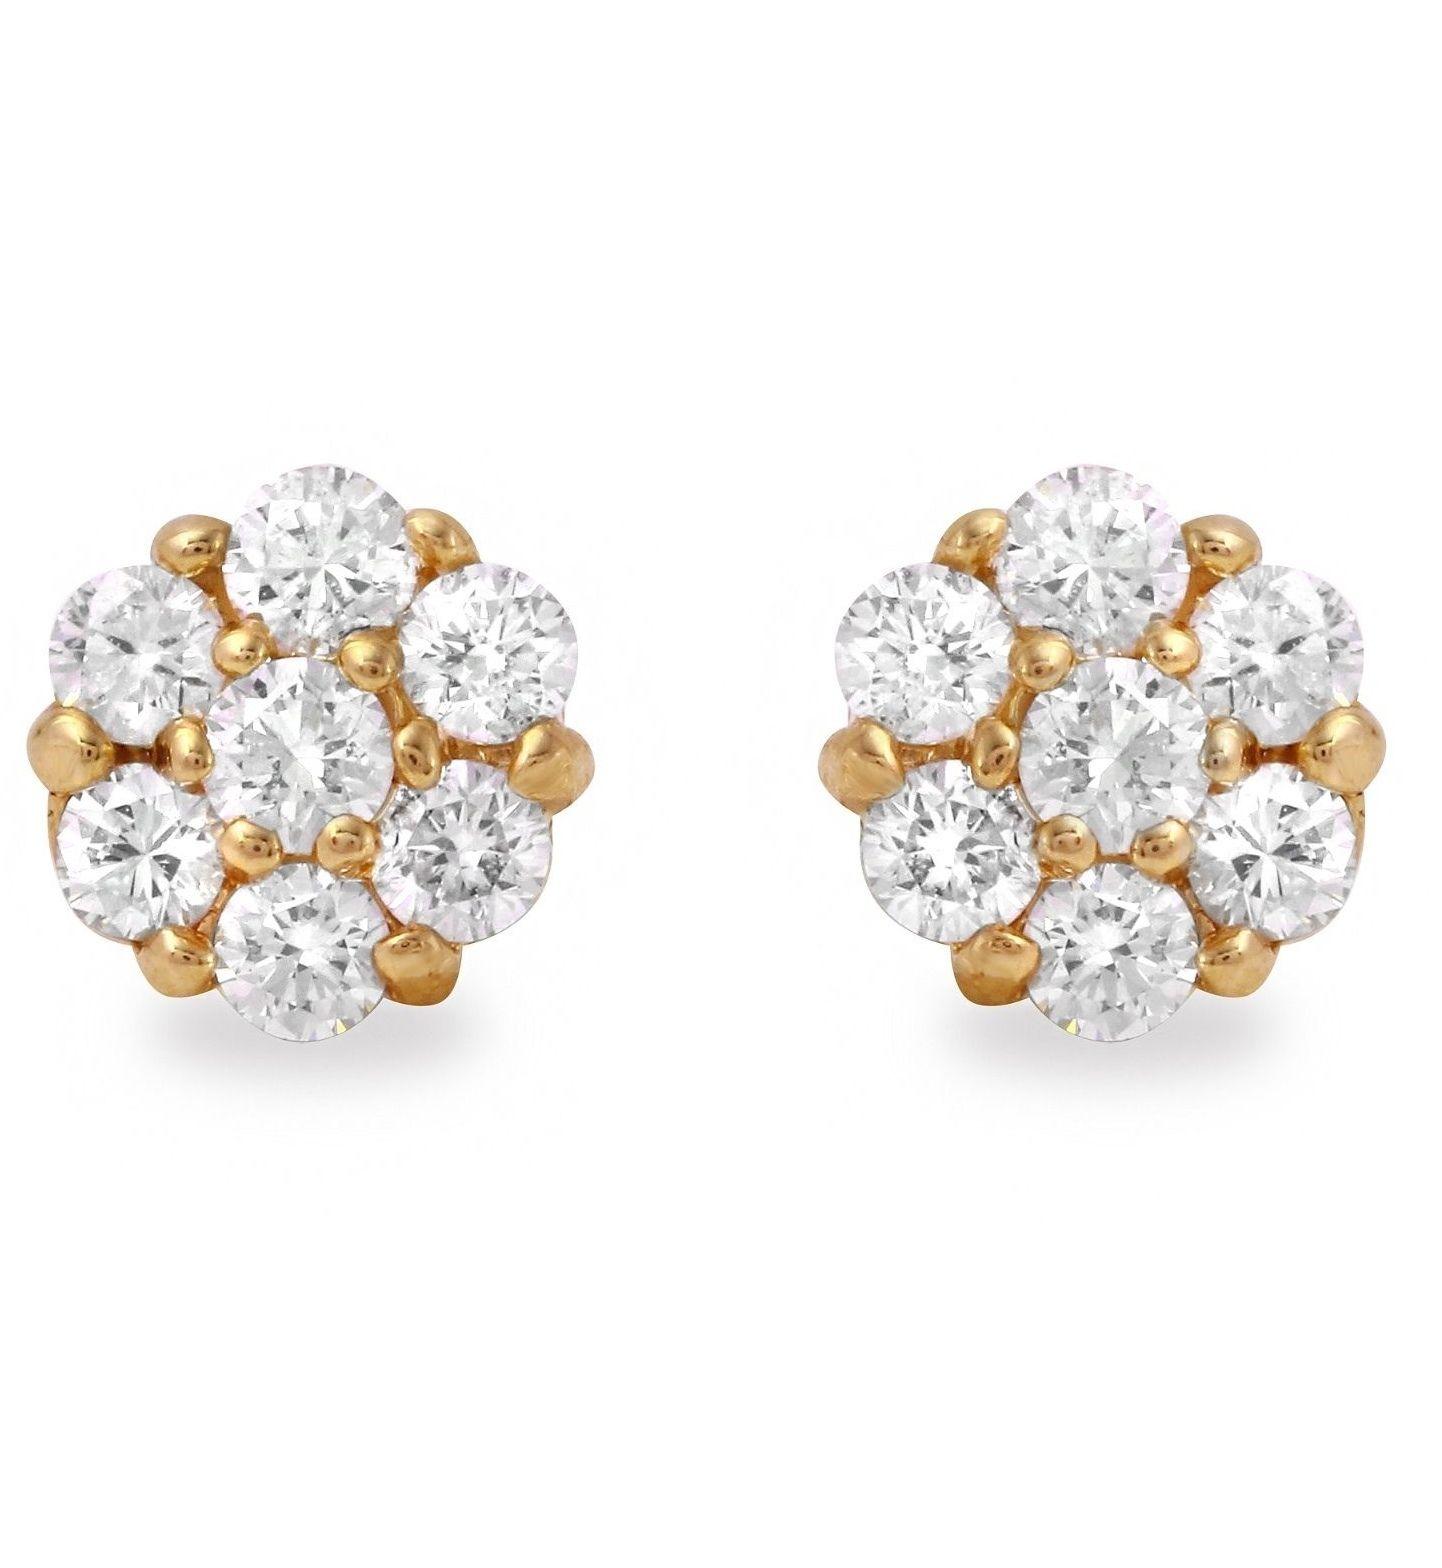 Exquisite 1.00 Carat Natural Diamond 14 Karat Solid Yellow Gold Earrings In New Condition For Sale In Los Angeles, CA